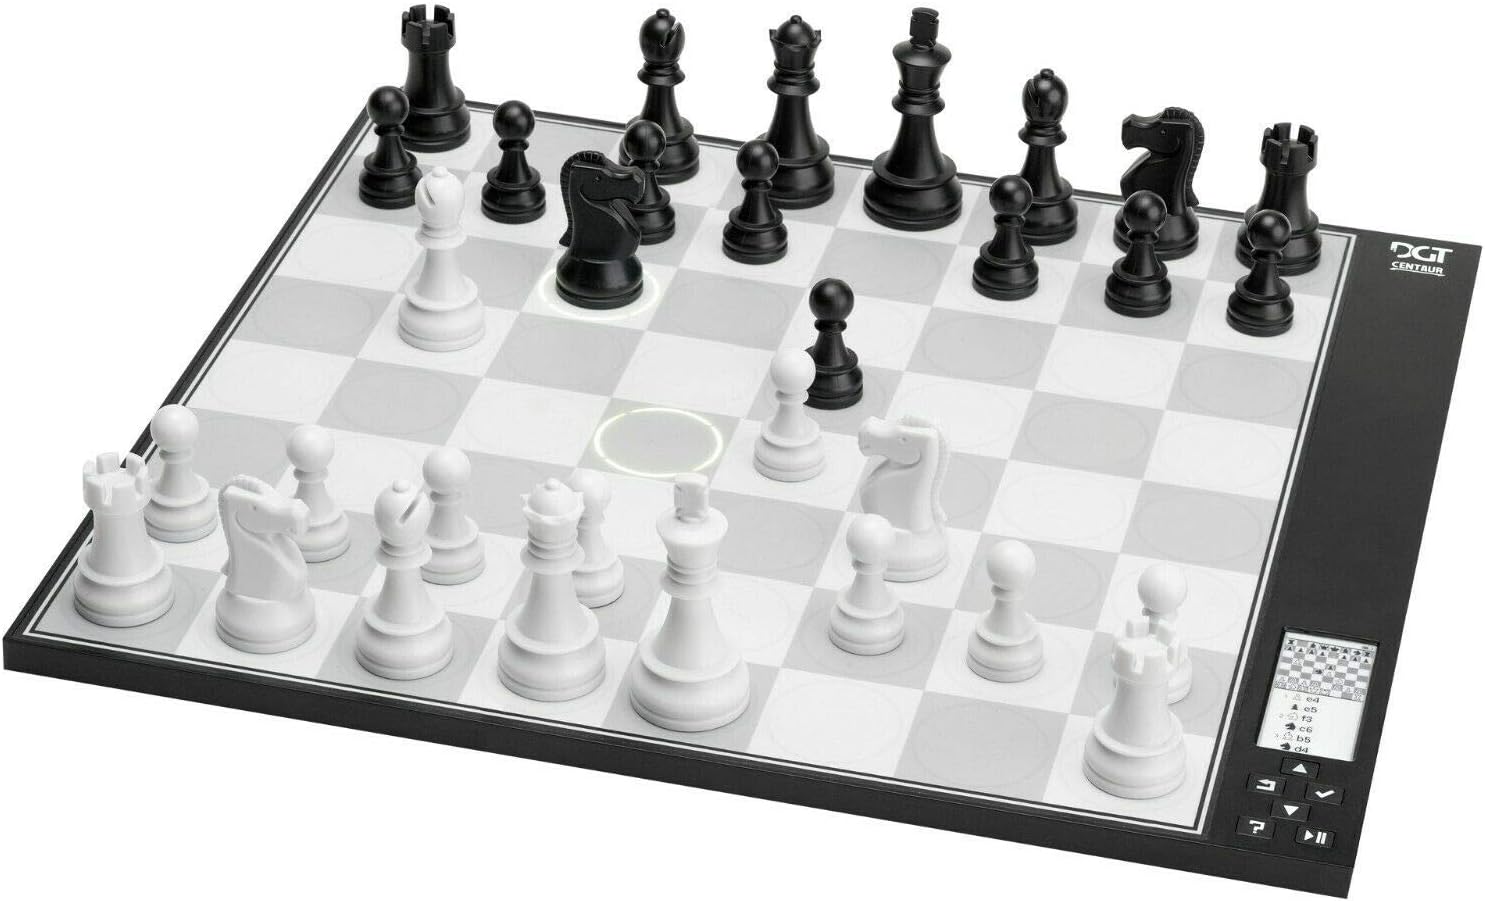 A tactical chess board